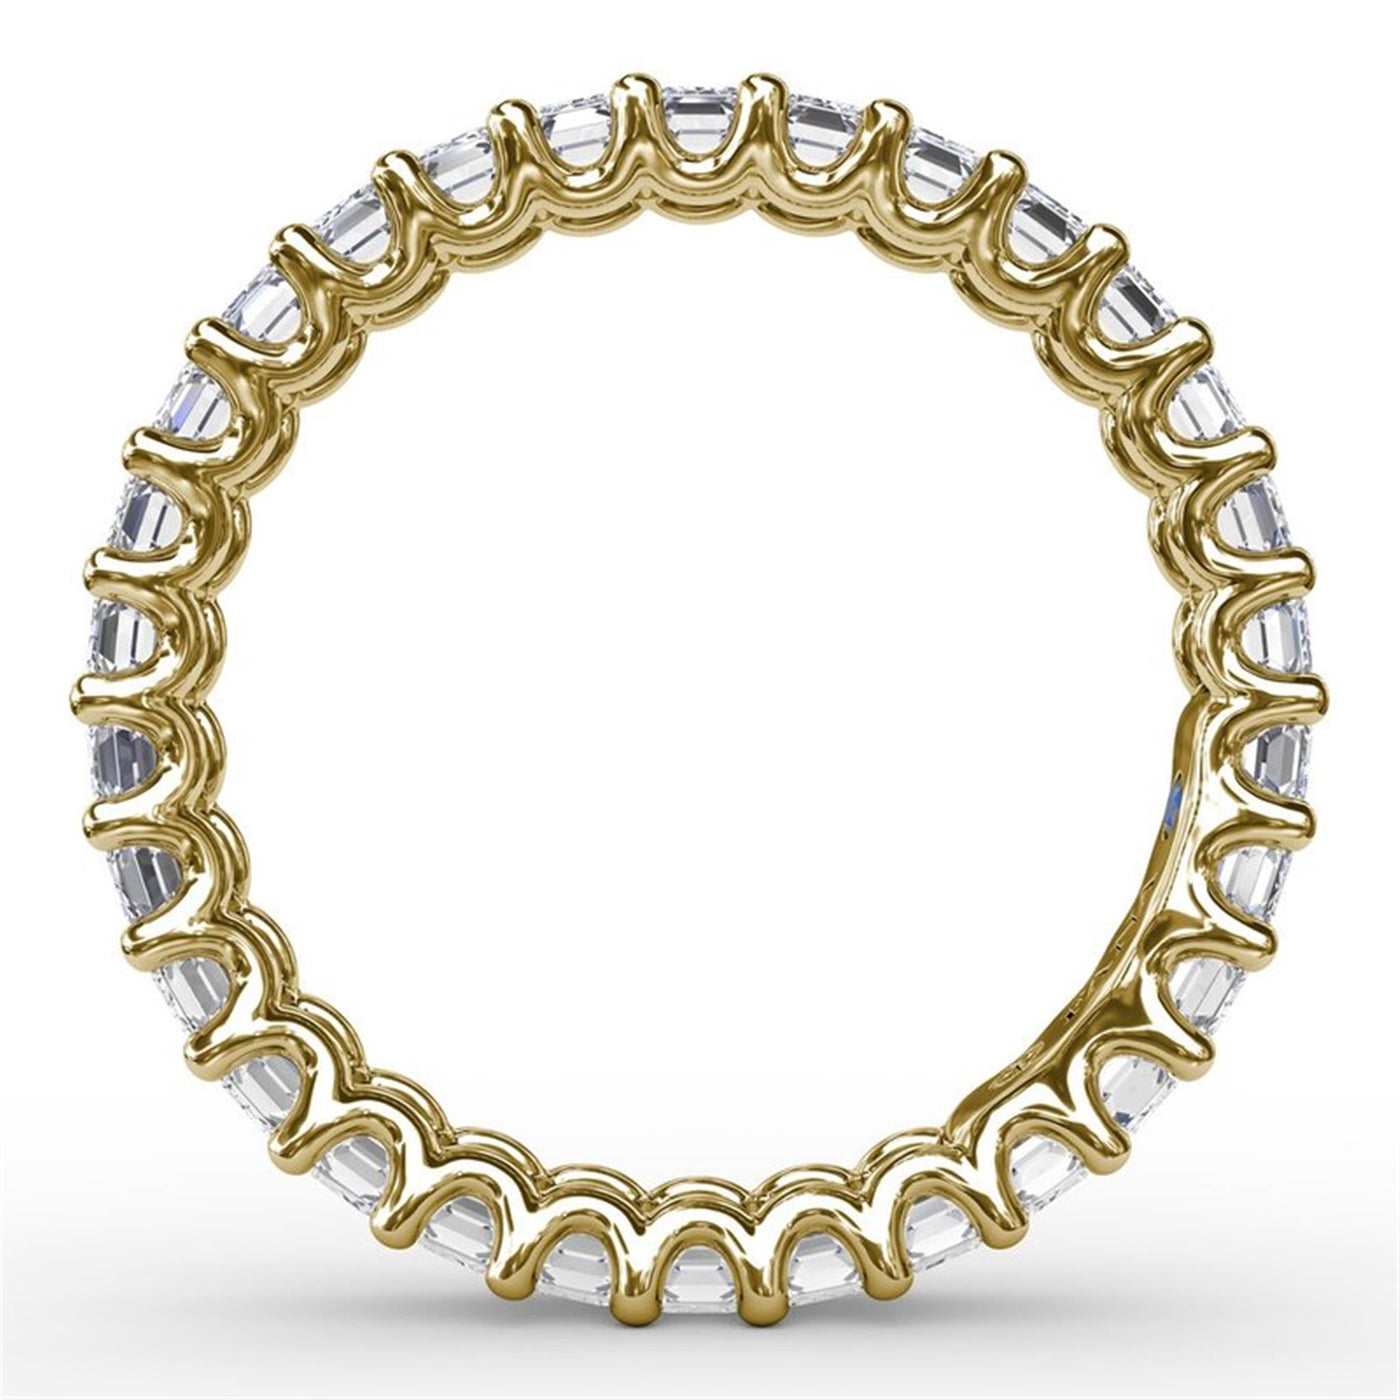 14K Yellow Gold 2.39ctw Diamond Eternity Band 
Featuring a Polished Finish